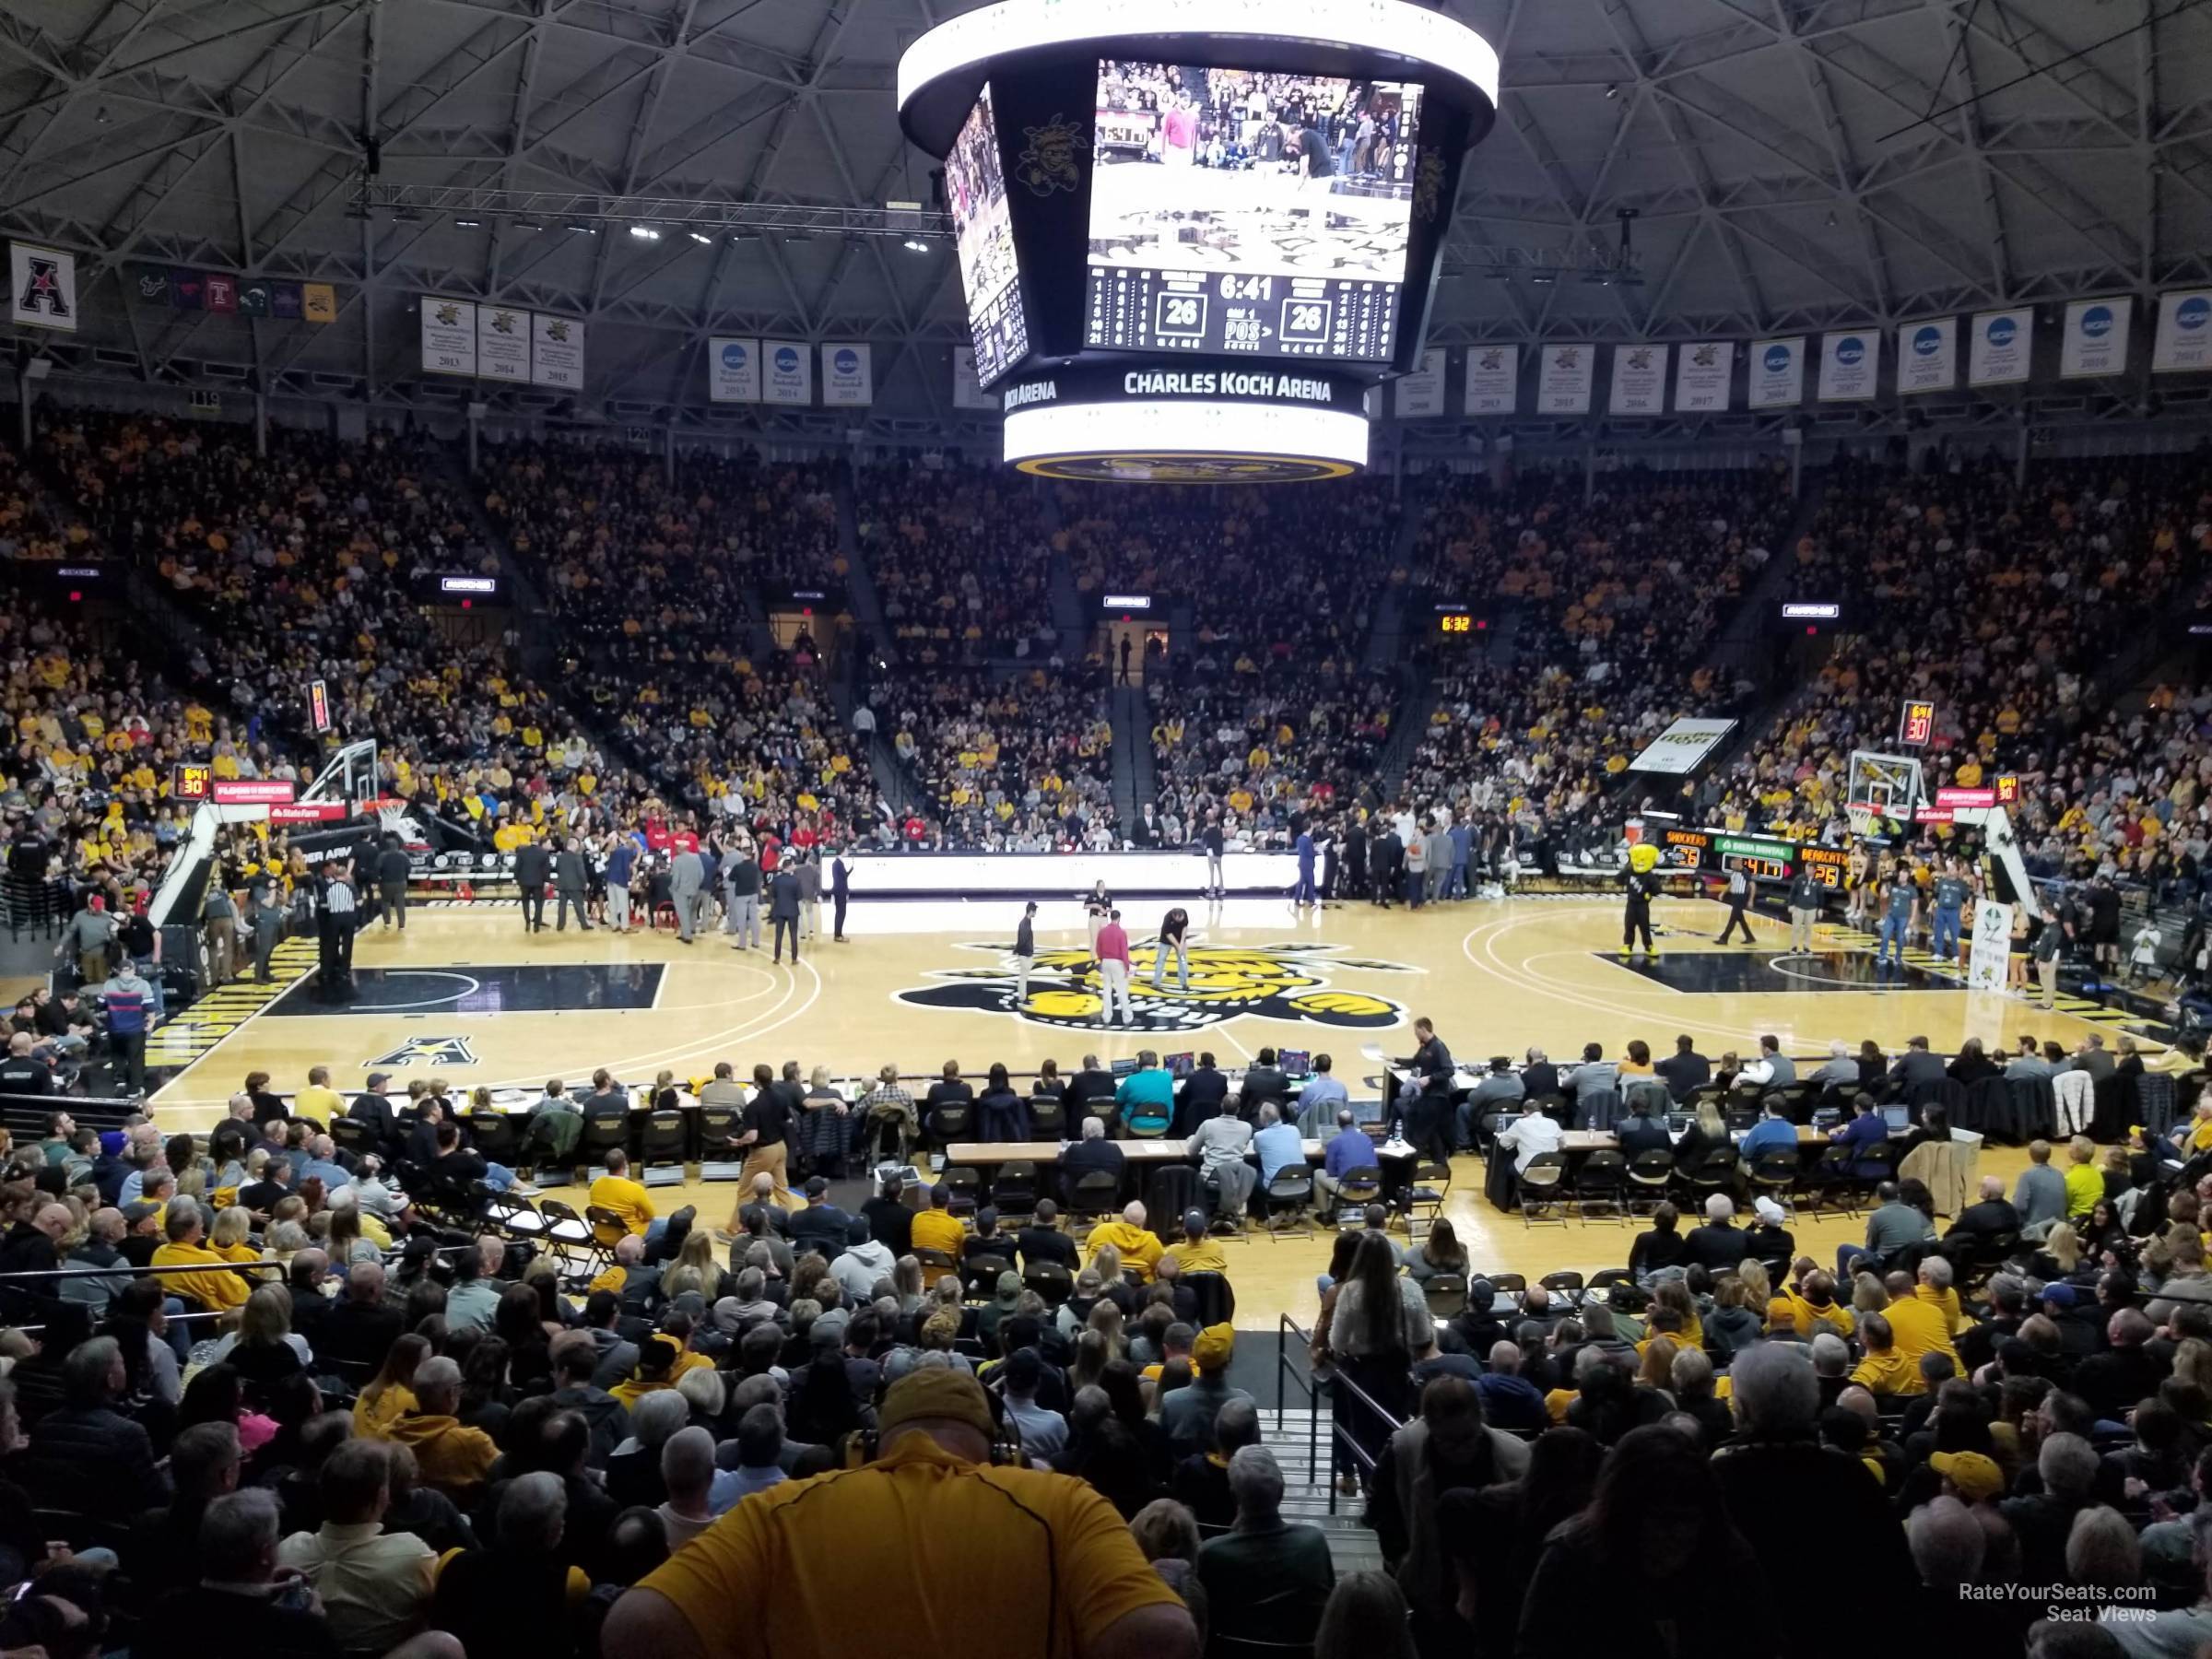 section 109, row 21 seat view  - charles koch arena